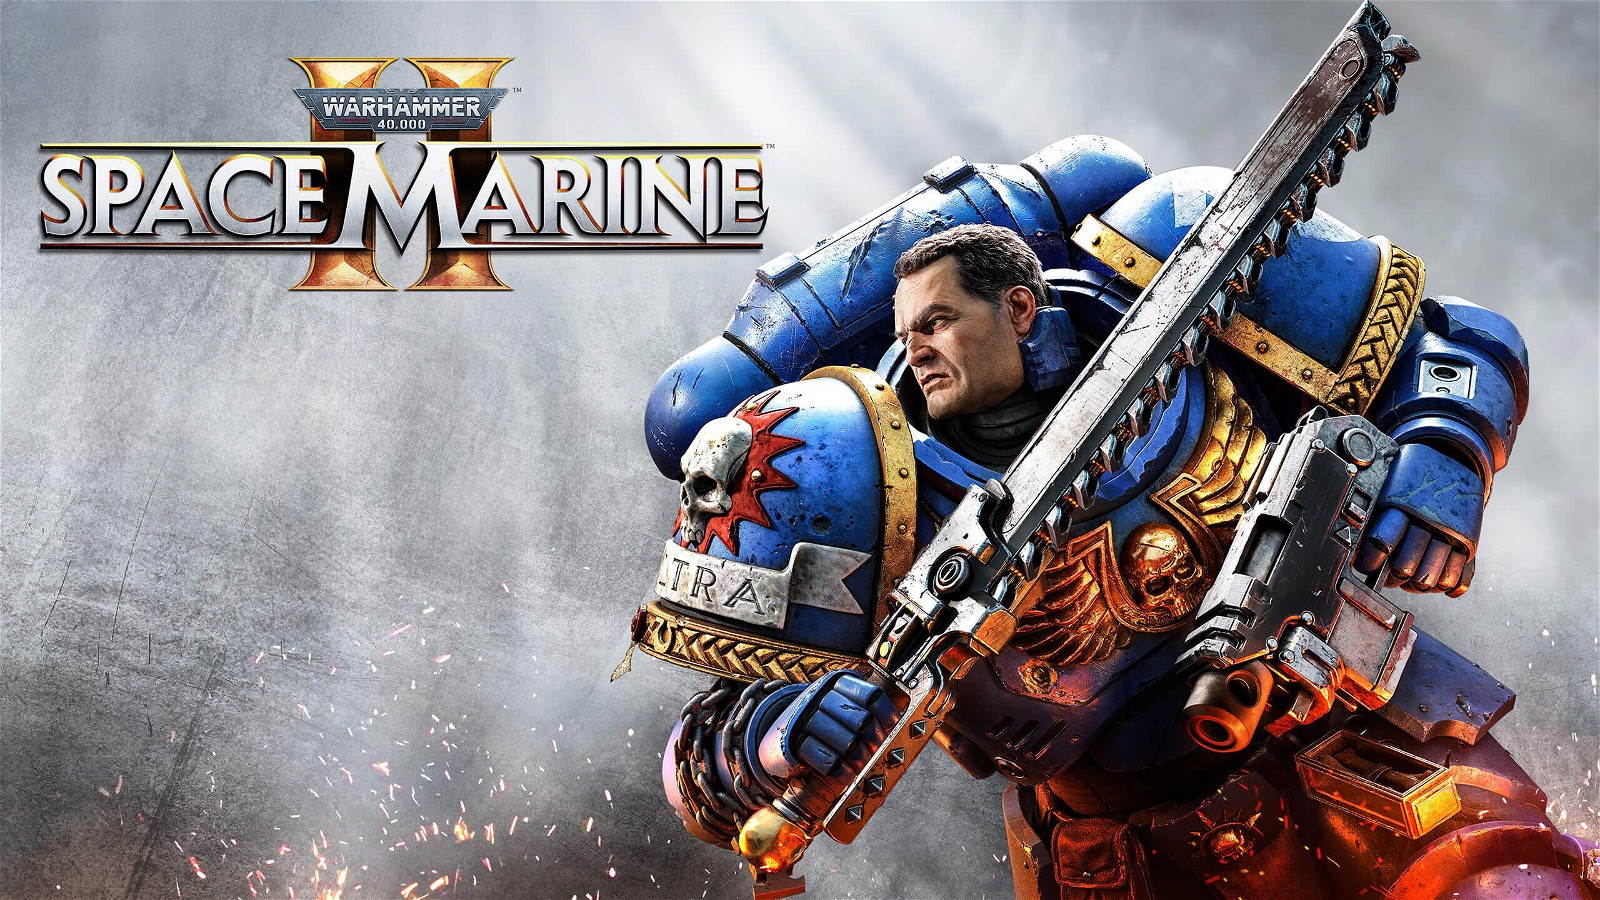 Saber is Introducing Their Own Take For Warhammer 40K: Space Marine 2